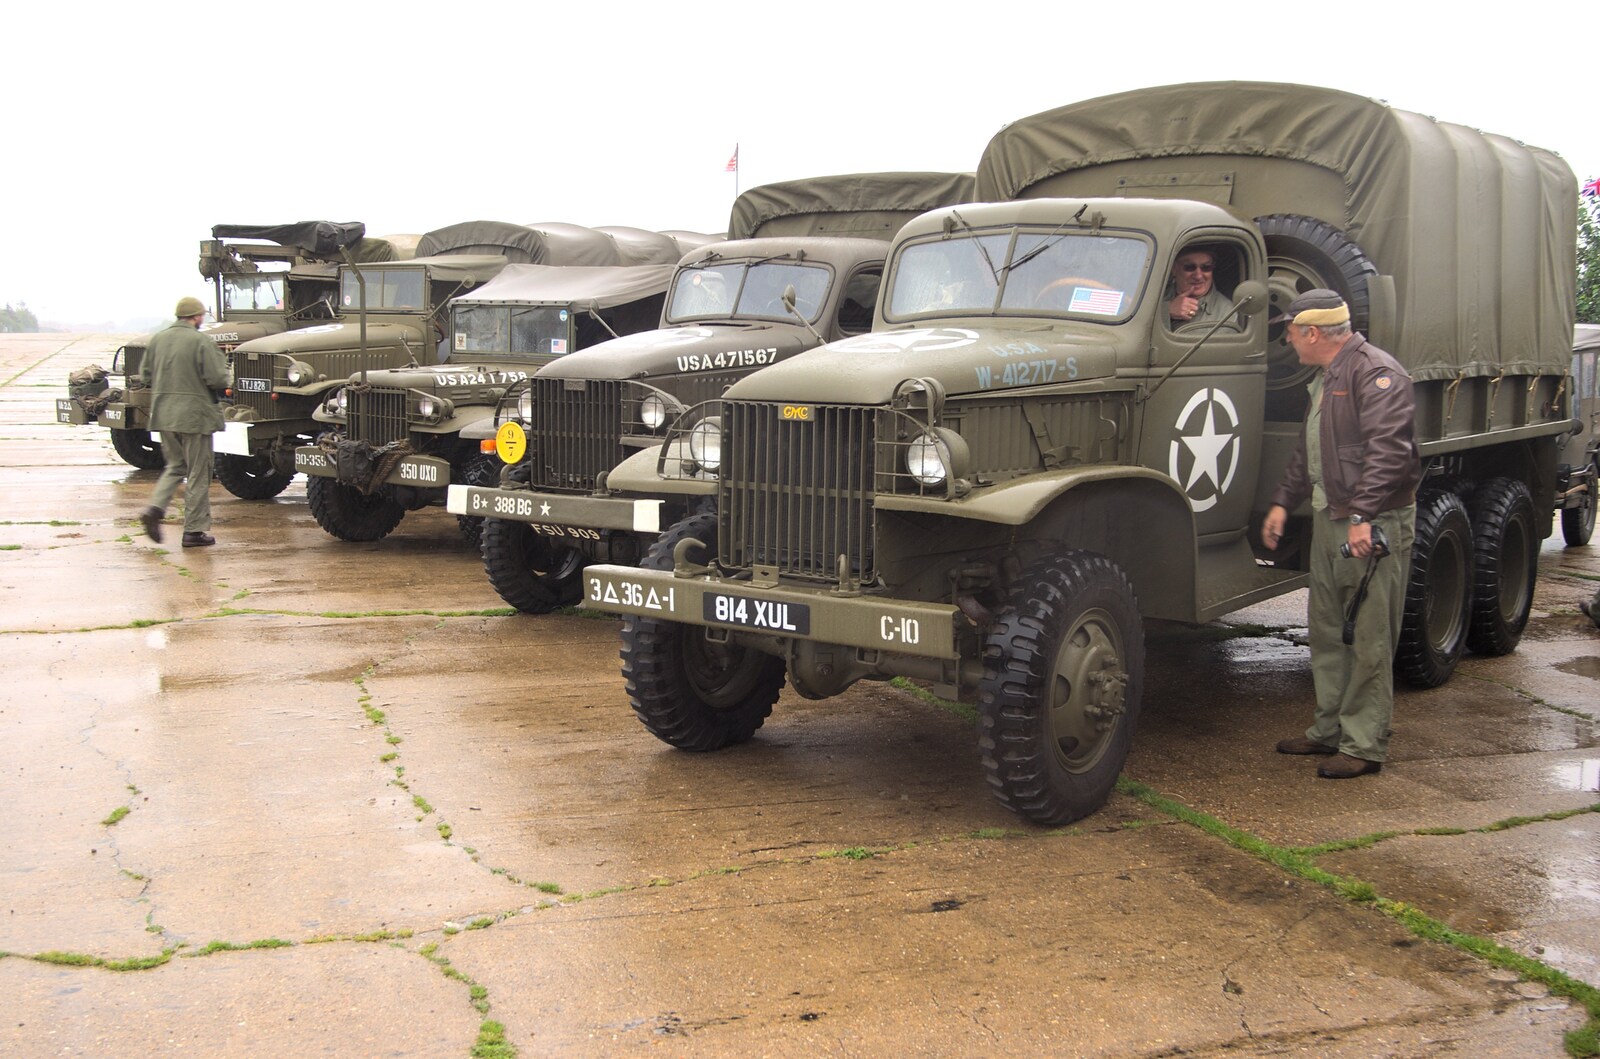 Trucks all lined up from Clive's Military Vehicle Convoy, Brome Aerodrome, Suffolk - 16th July 2011